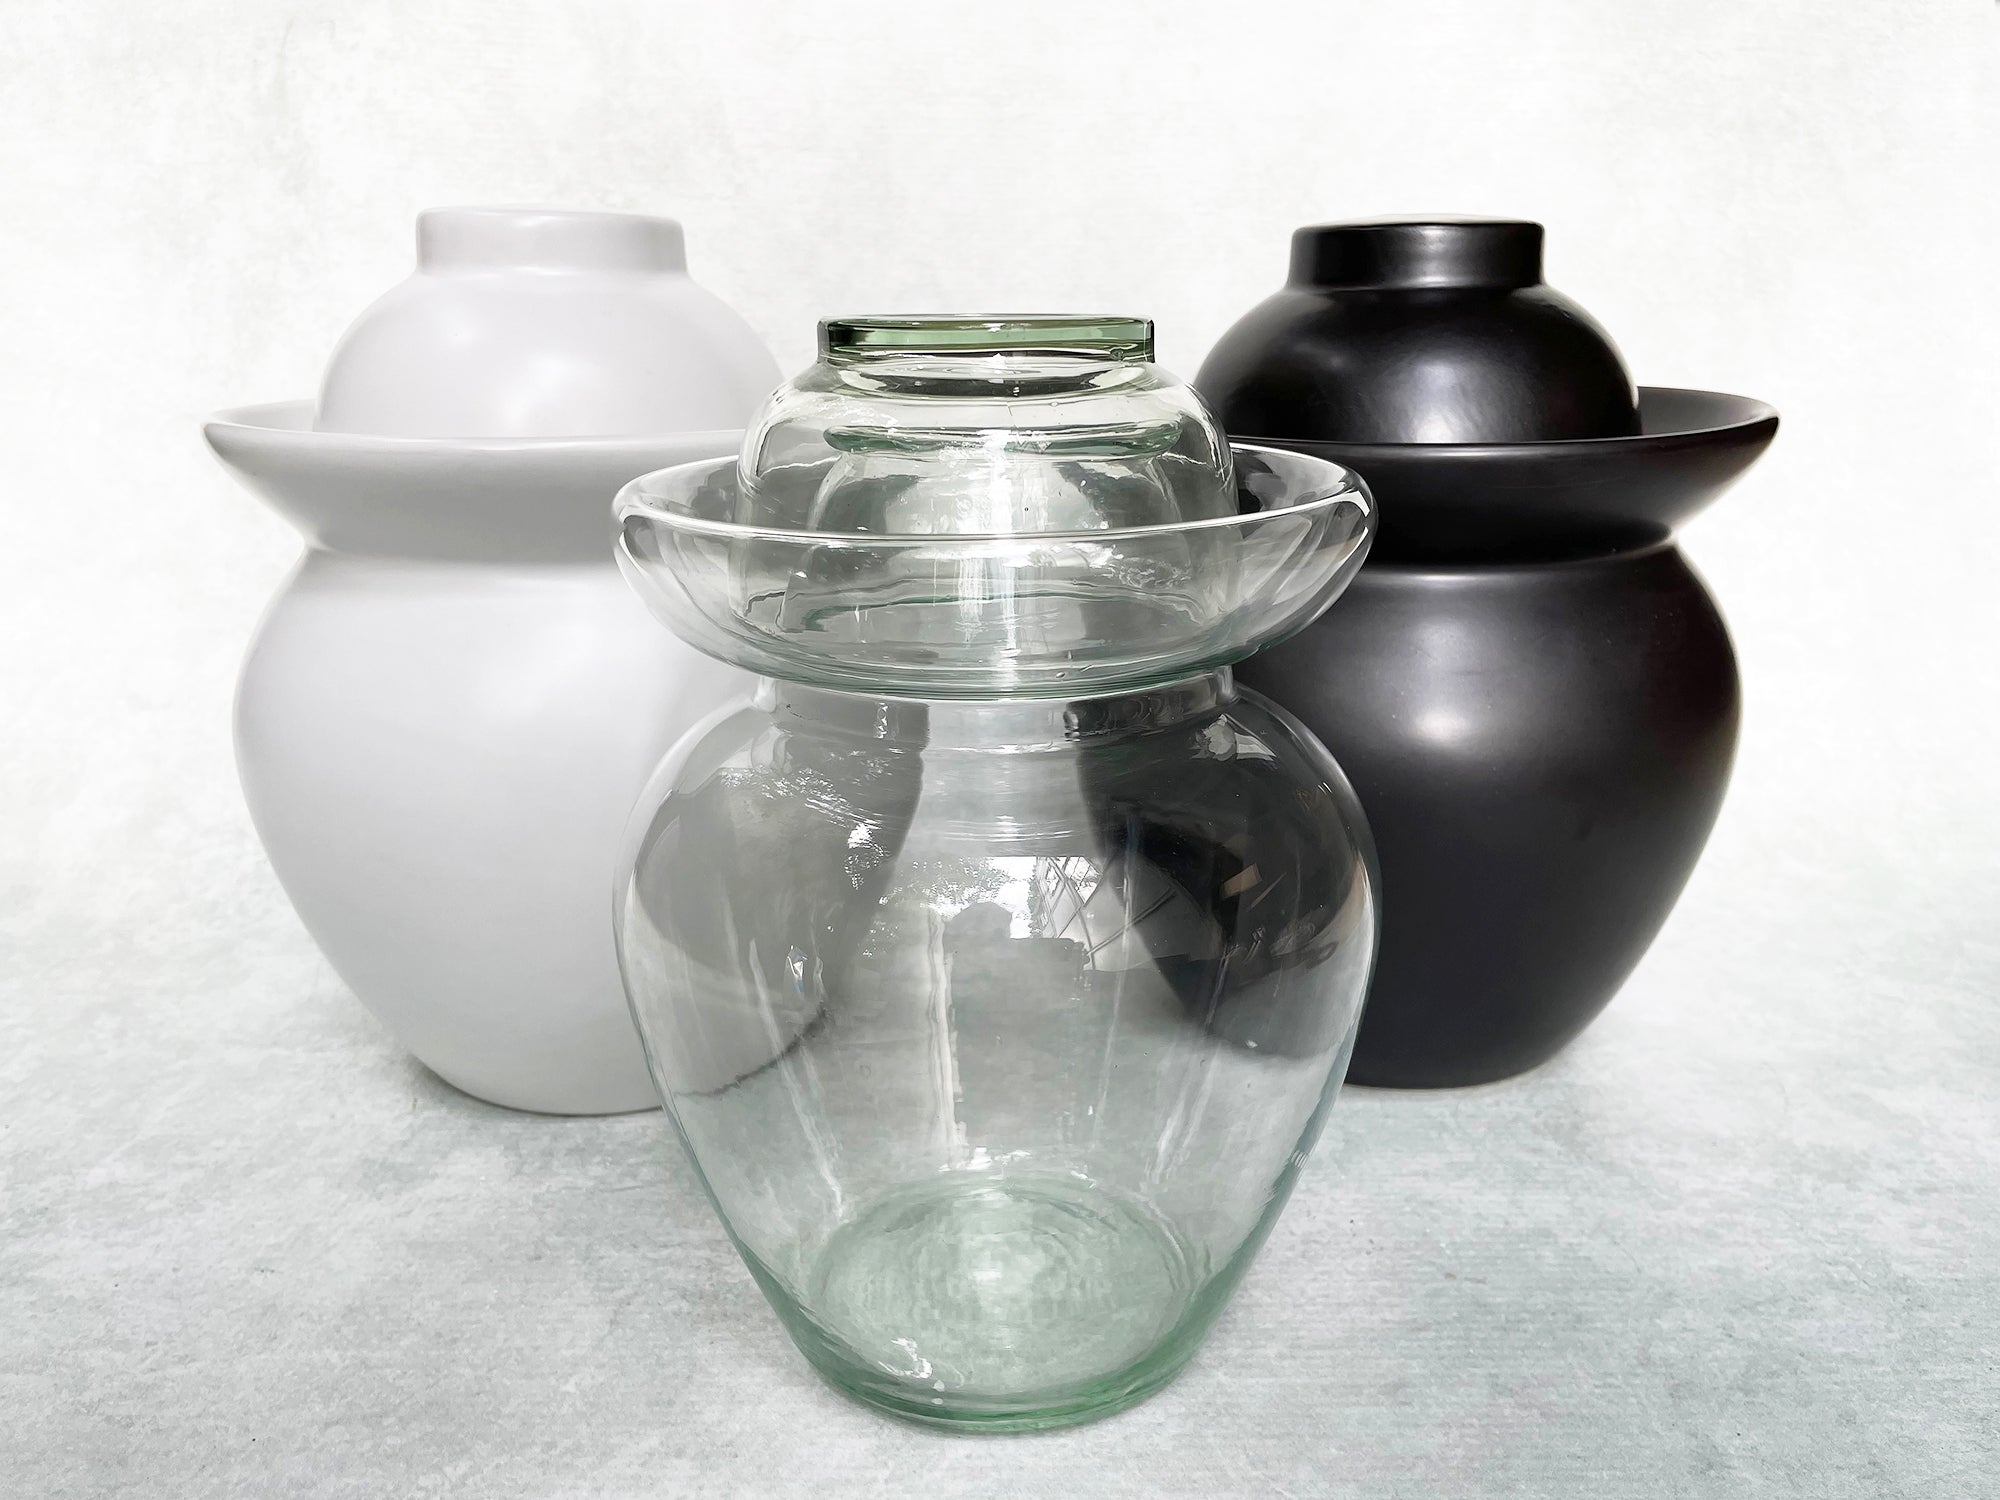 Glass and ceramic Chinese pickles jars